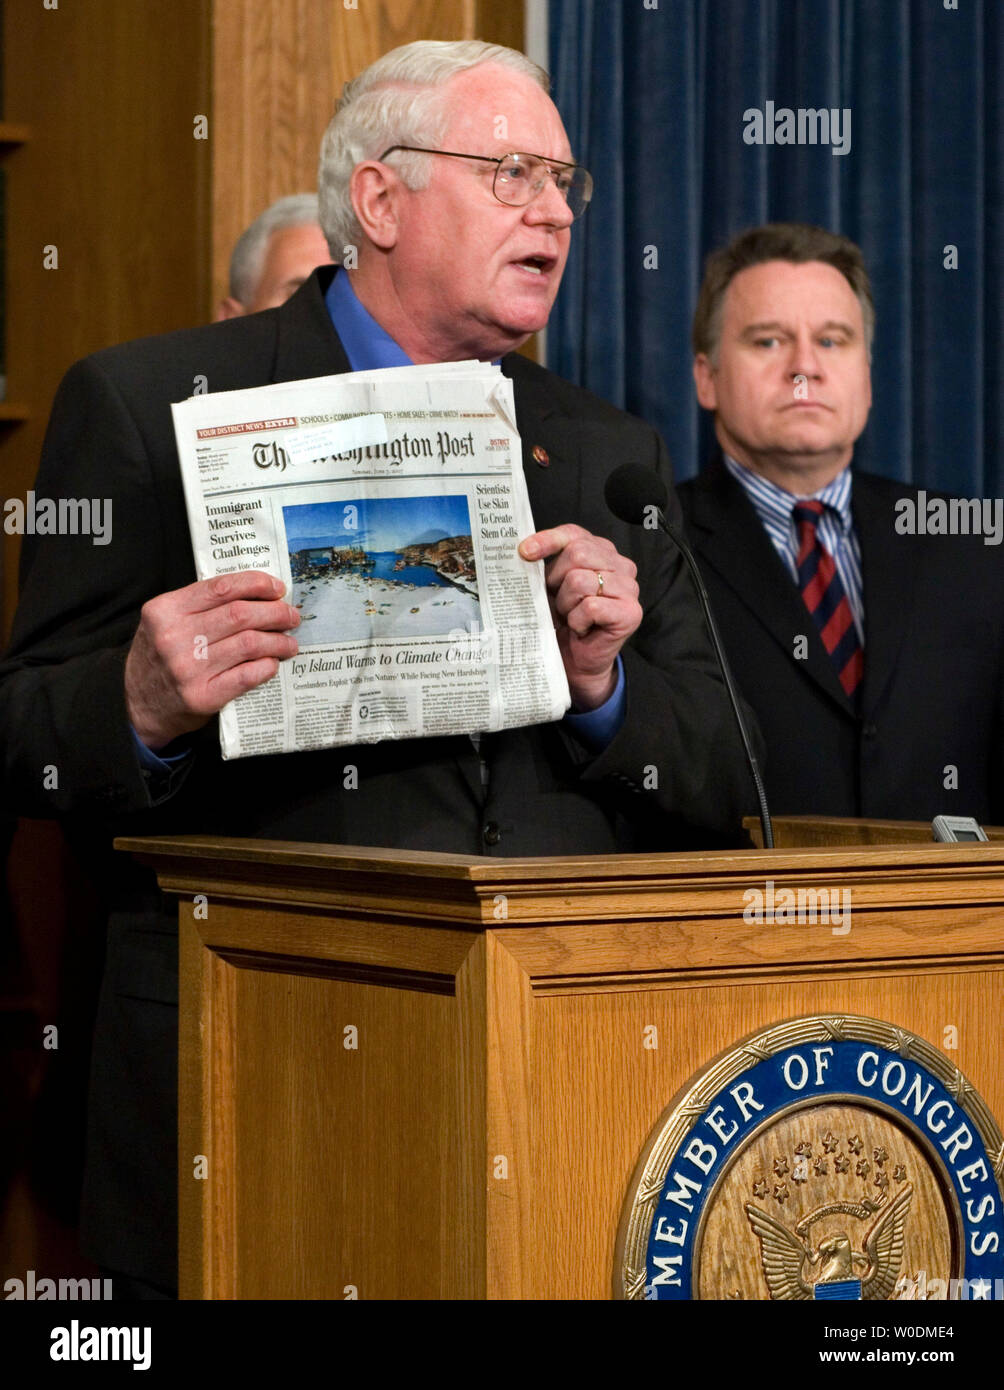 Rep. Joseph Pitts, R-PA, holds a 'Washington Post' newspaper with a headline regarding adult stem cell research, as Rep. Chris Smith, R-NJ, looks on, during a news conference on Capitol Hill in Washington on June 7, 2007. The Republicans say they have enough votes to sustain a Presidential veto of a bill recently passed by Congress that funds embryonic stem cell research. (UPI Photo/Roger L. Wollenberg) Stock Photo